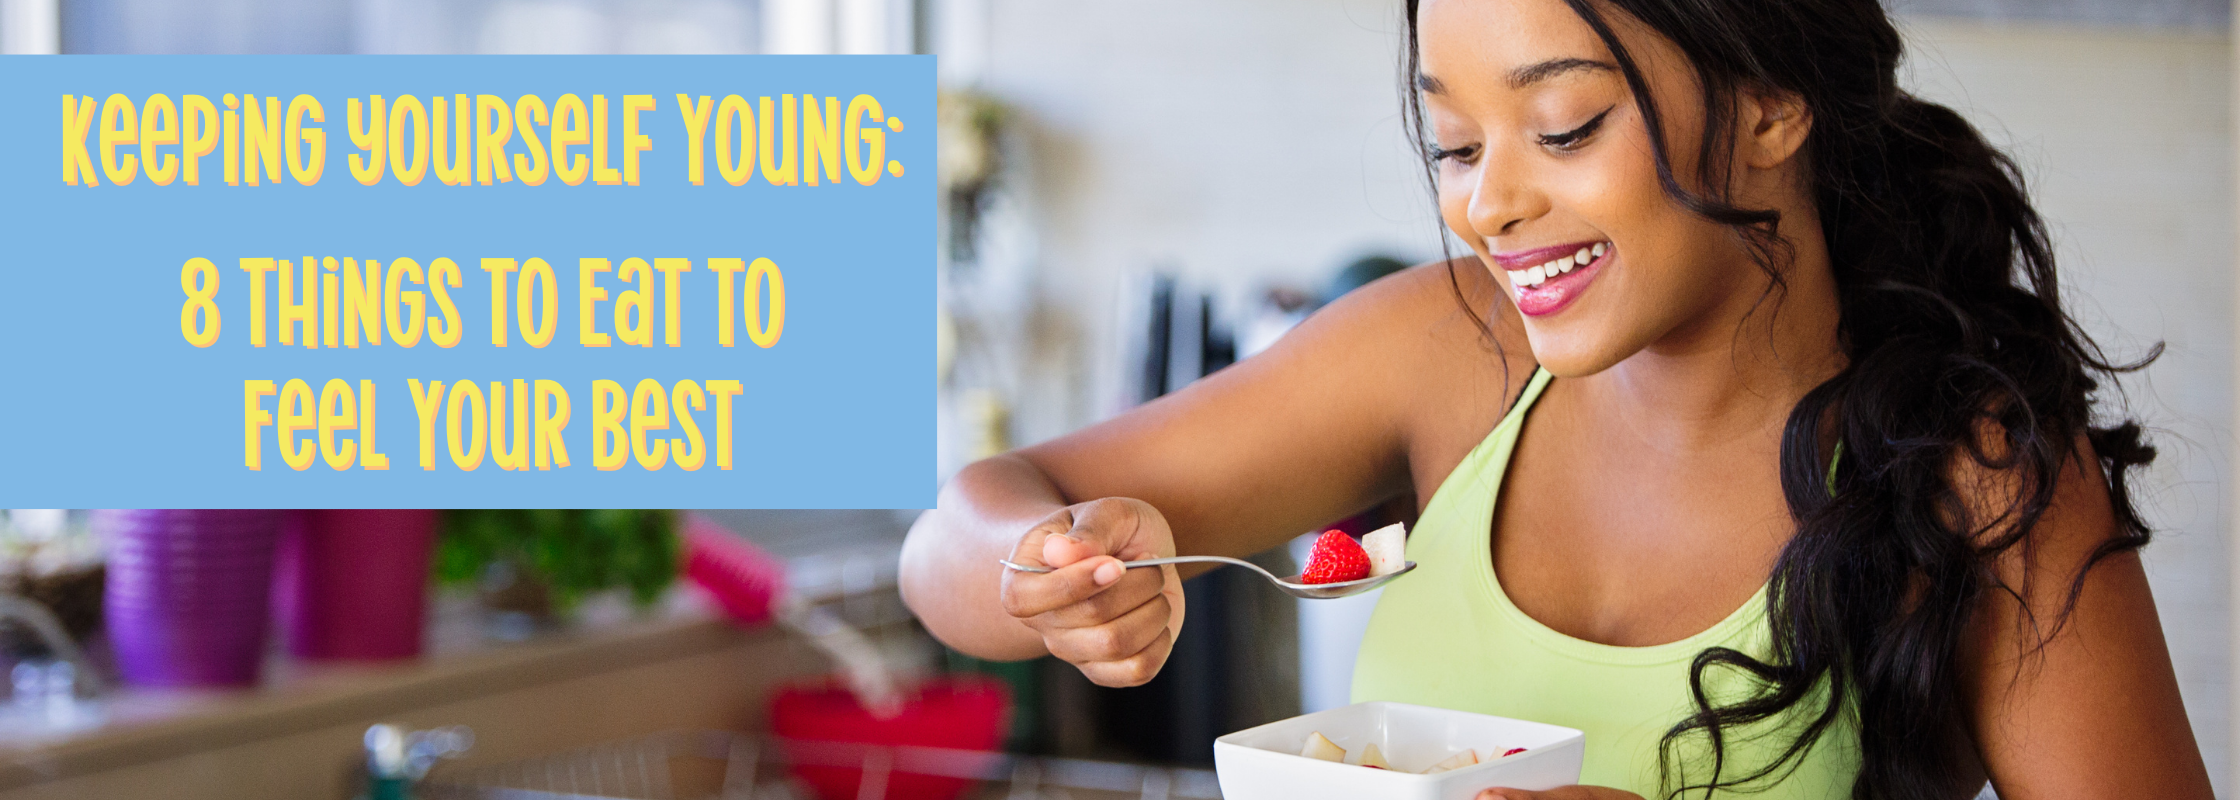 Keeping Yourself Young: 8 Things to Eat to Feel Your Best